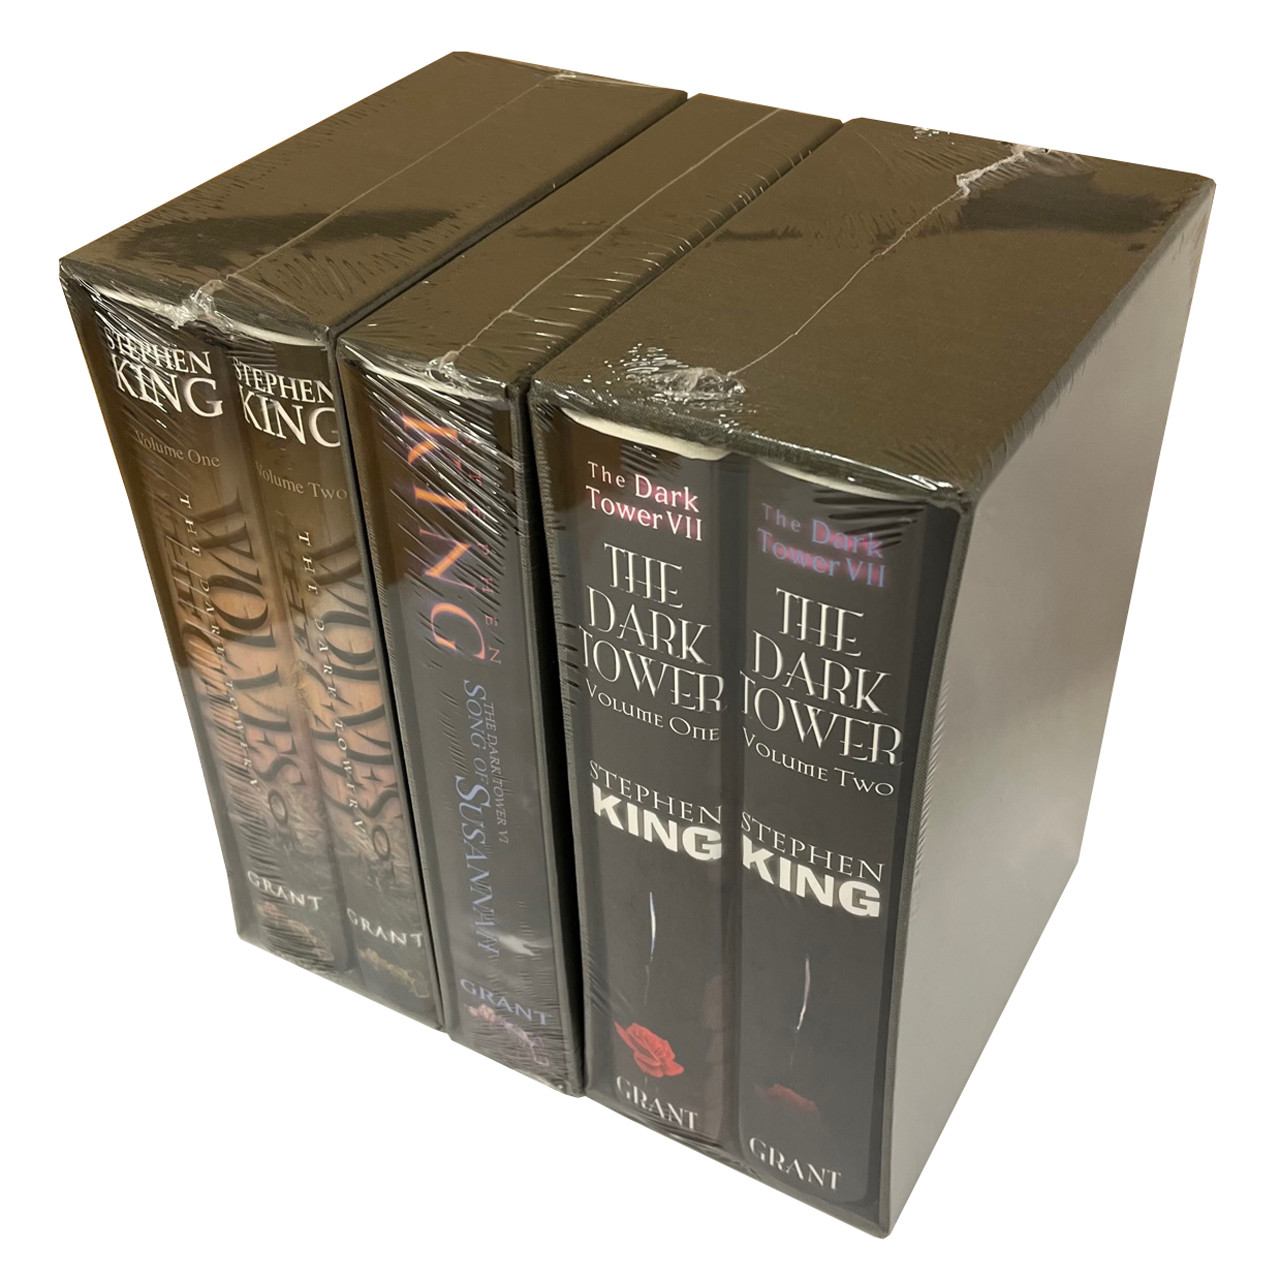 Stephen King "The Dark Tower" Volumes V, VI, VII Signed Limited Edition, 3-Volume Matching Numbers Set [Sealed]